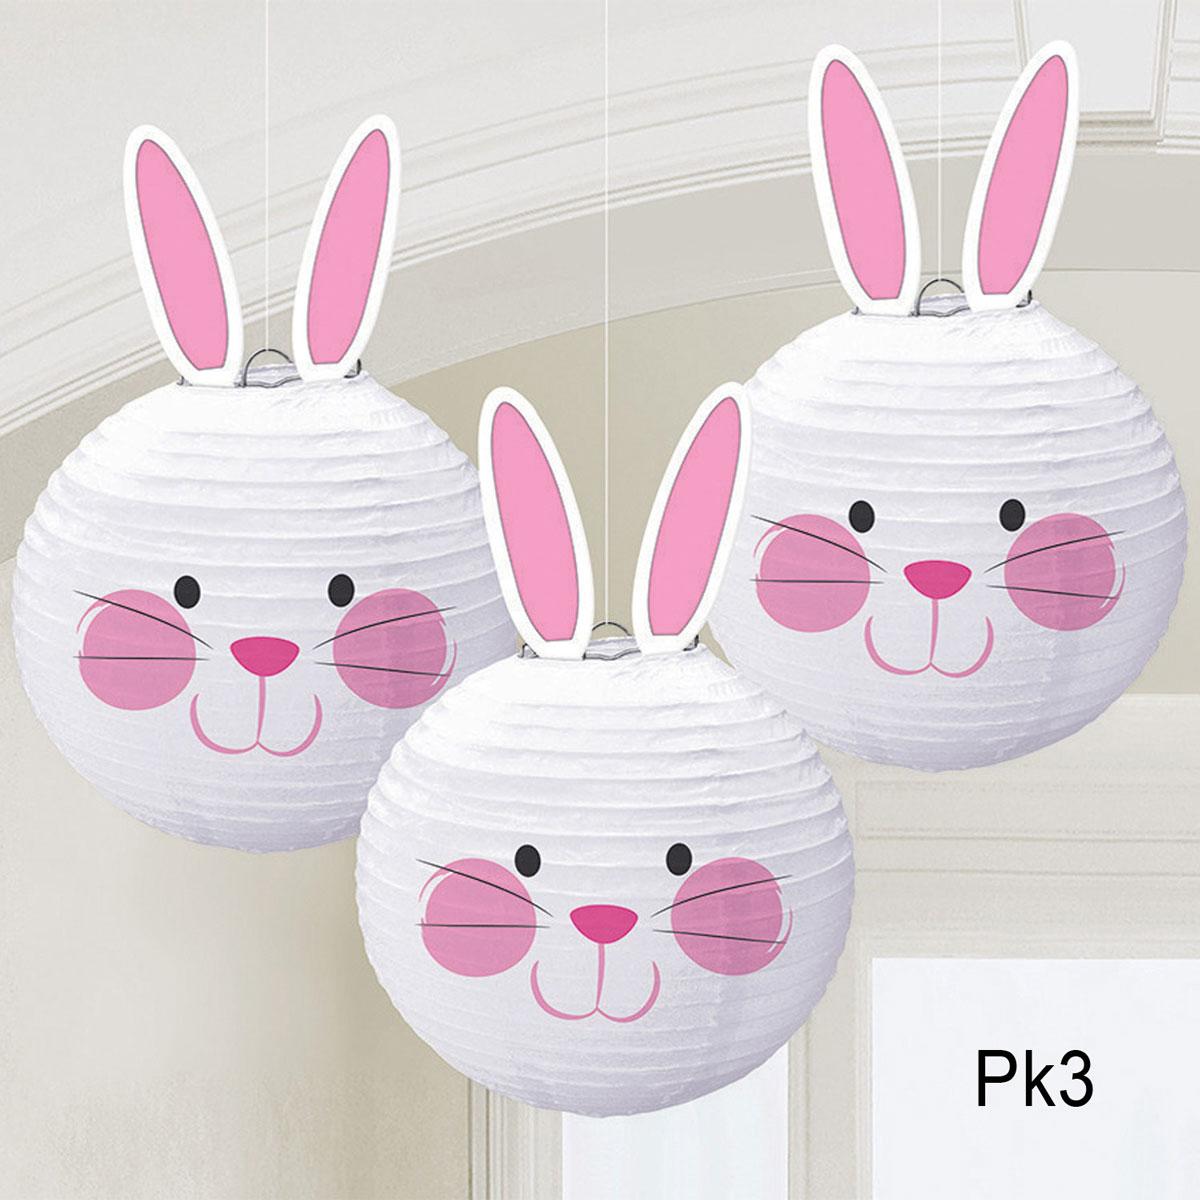 Easter Bunny Lanterns 3pcs by Amscan 241986 avaiable here at Karnival Costumes online party shop